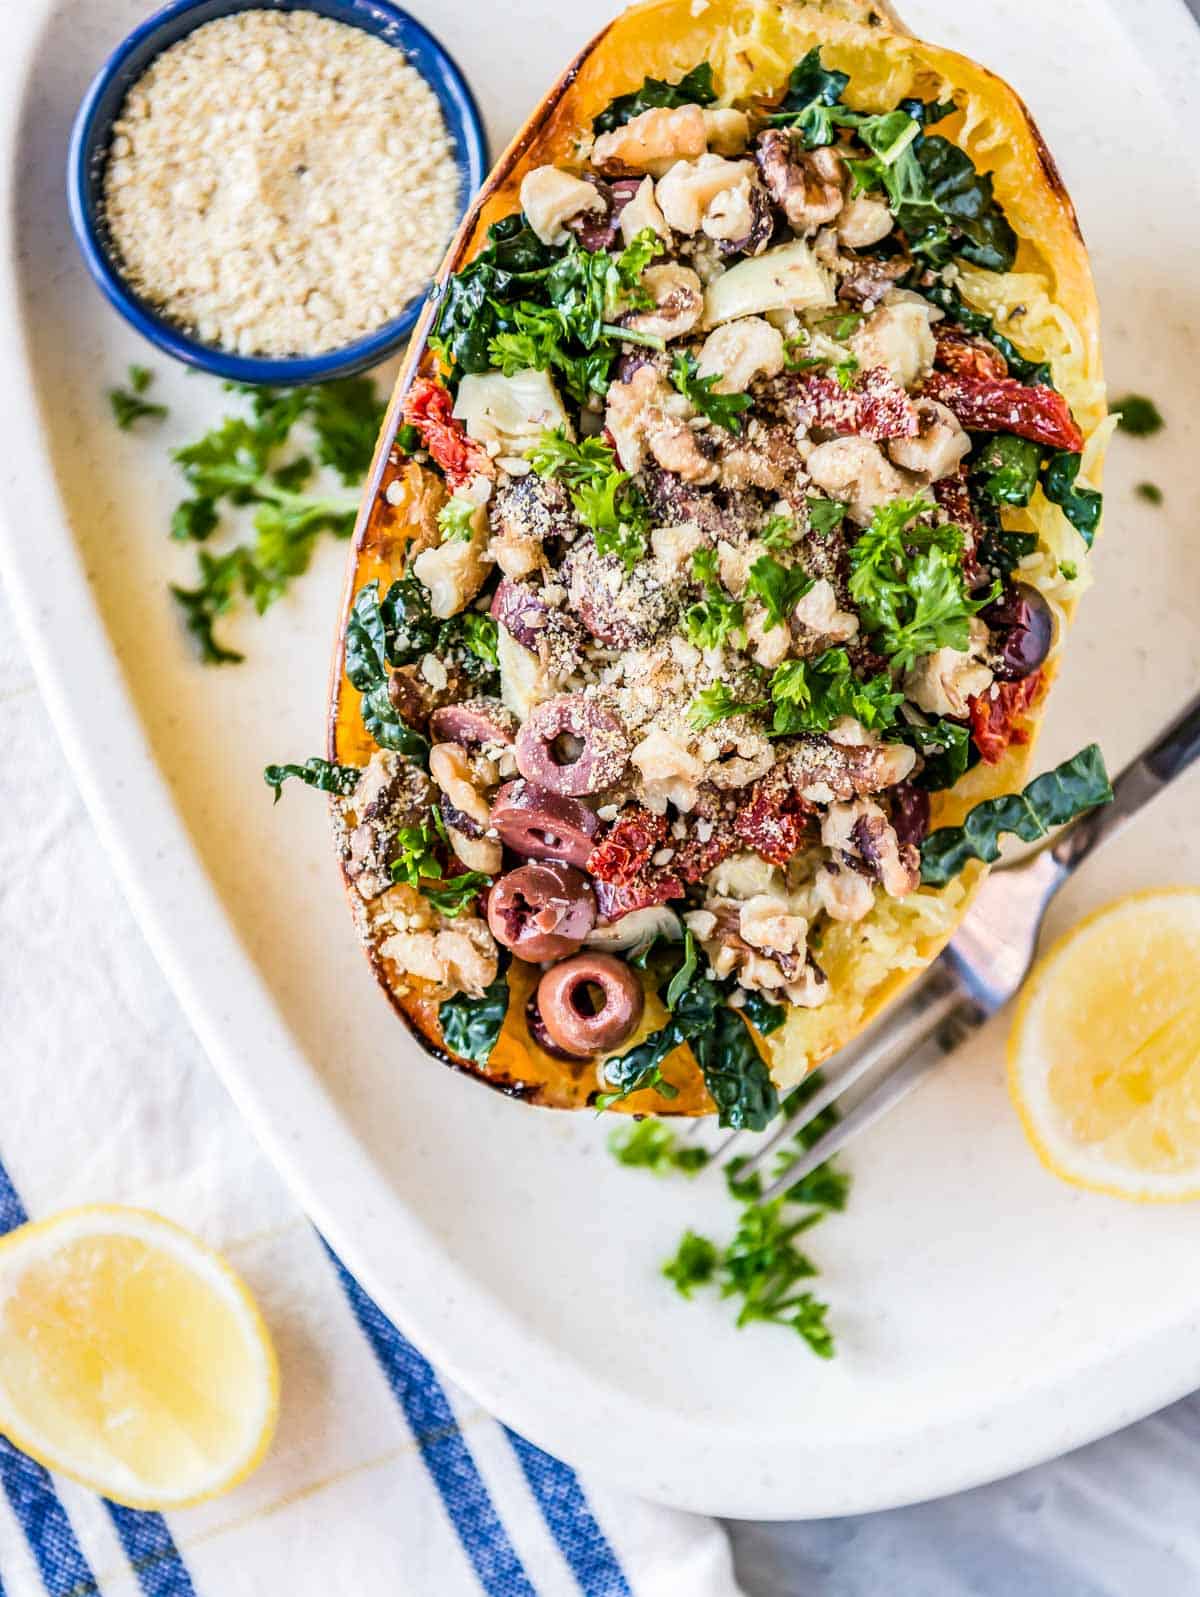 Roasted squash with olives and healthy greens in a Mediterranean recipe